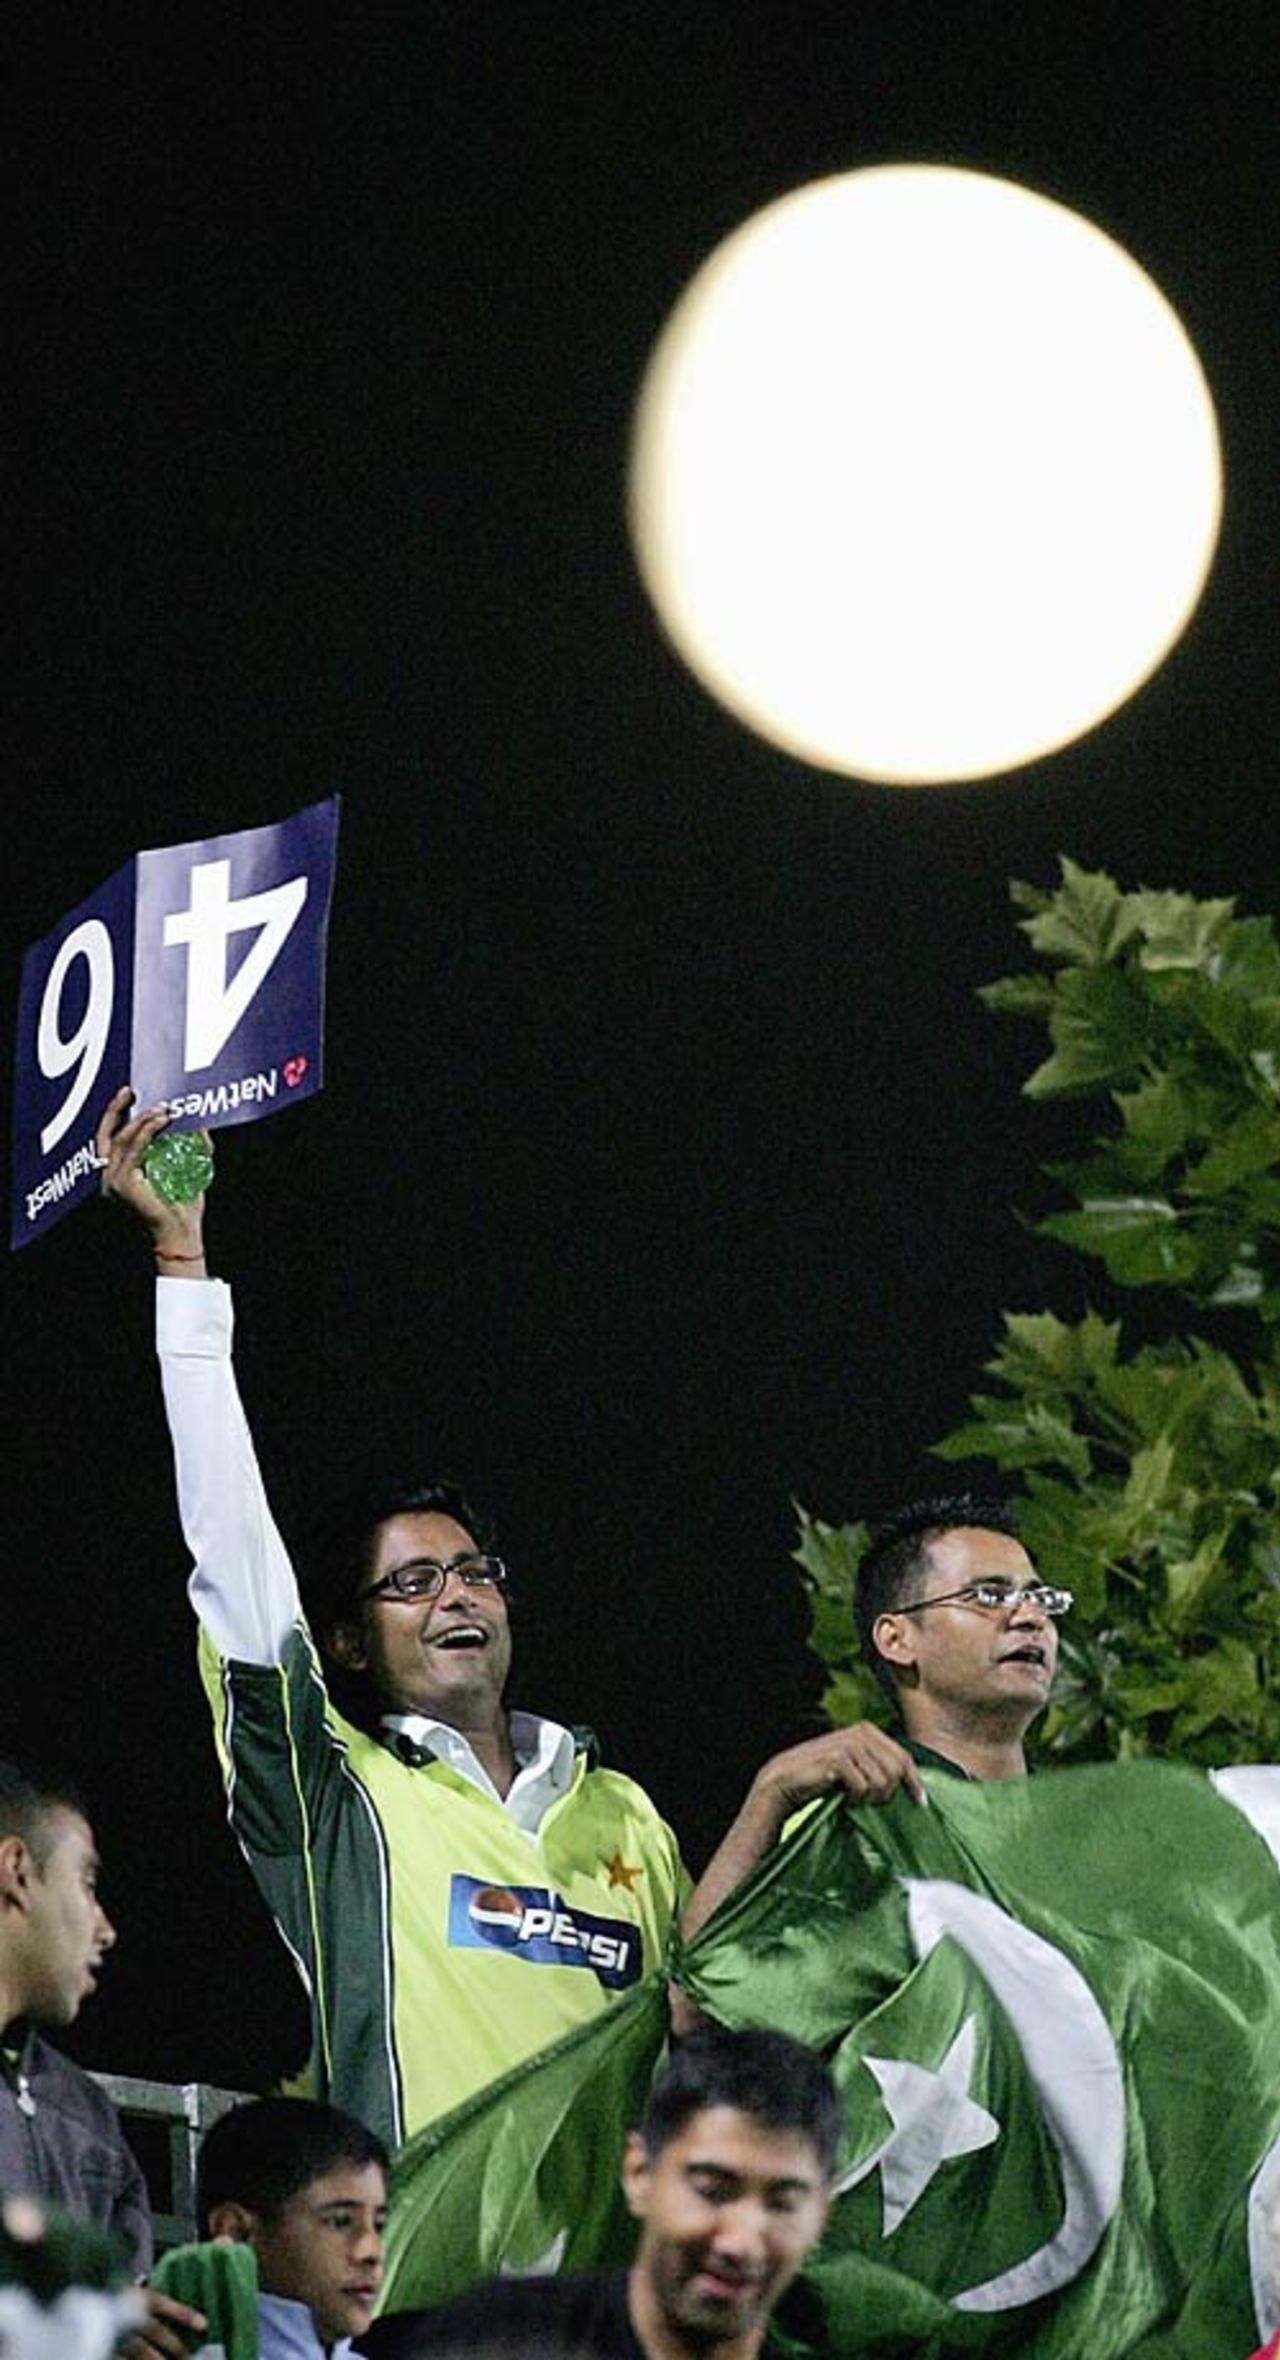 Pakistani fans roar their support under a nearly full moon,  England v Pakistan, 3rd ODI, The Rose Bowl, September 5, 2006